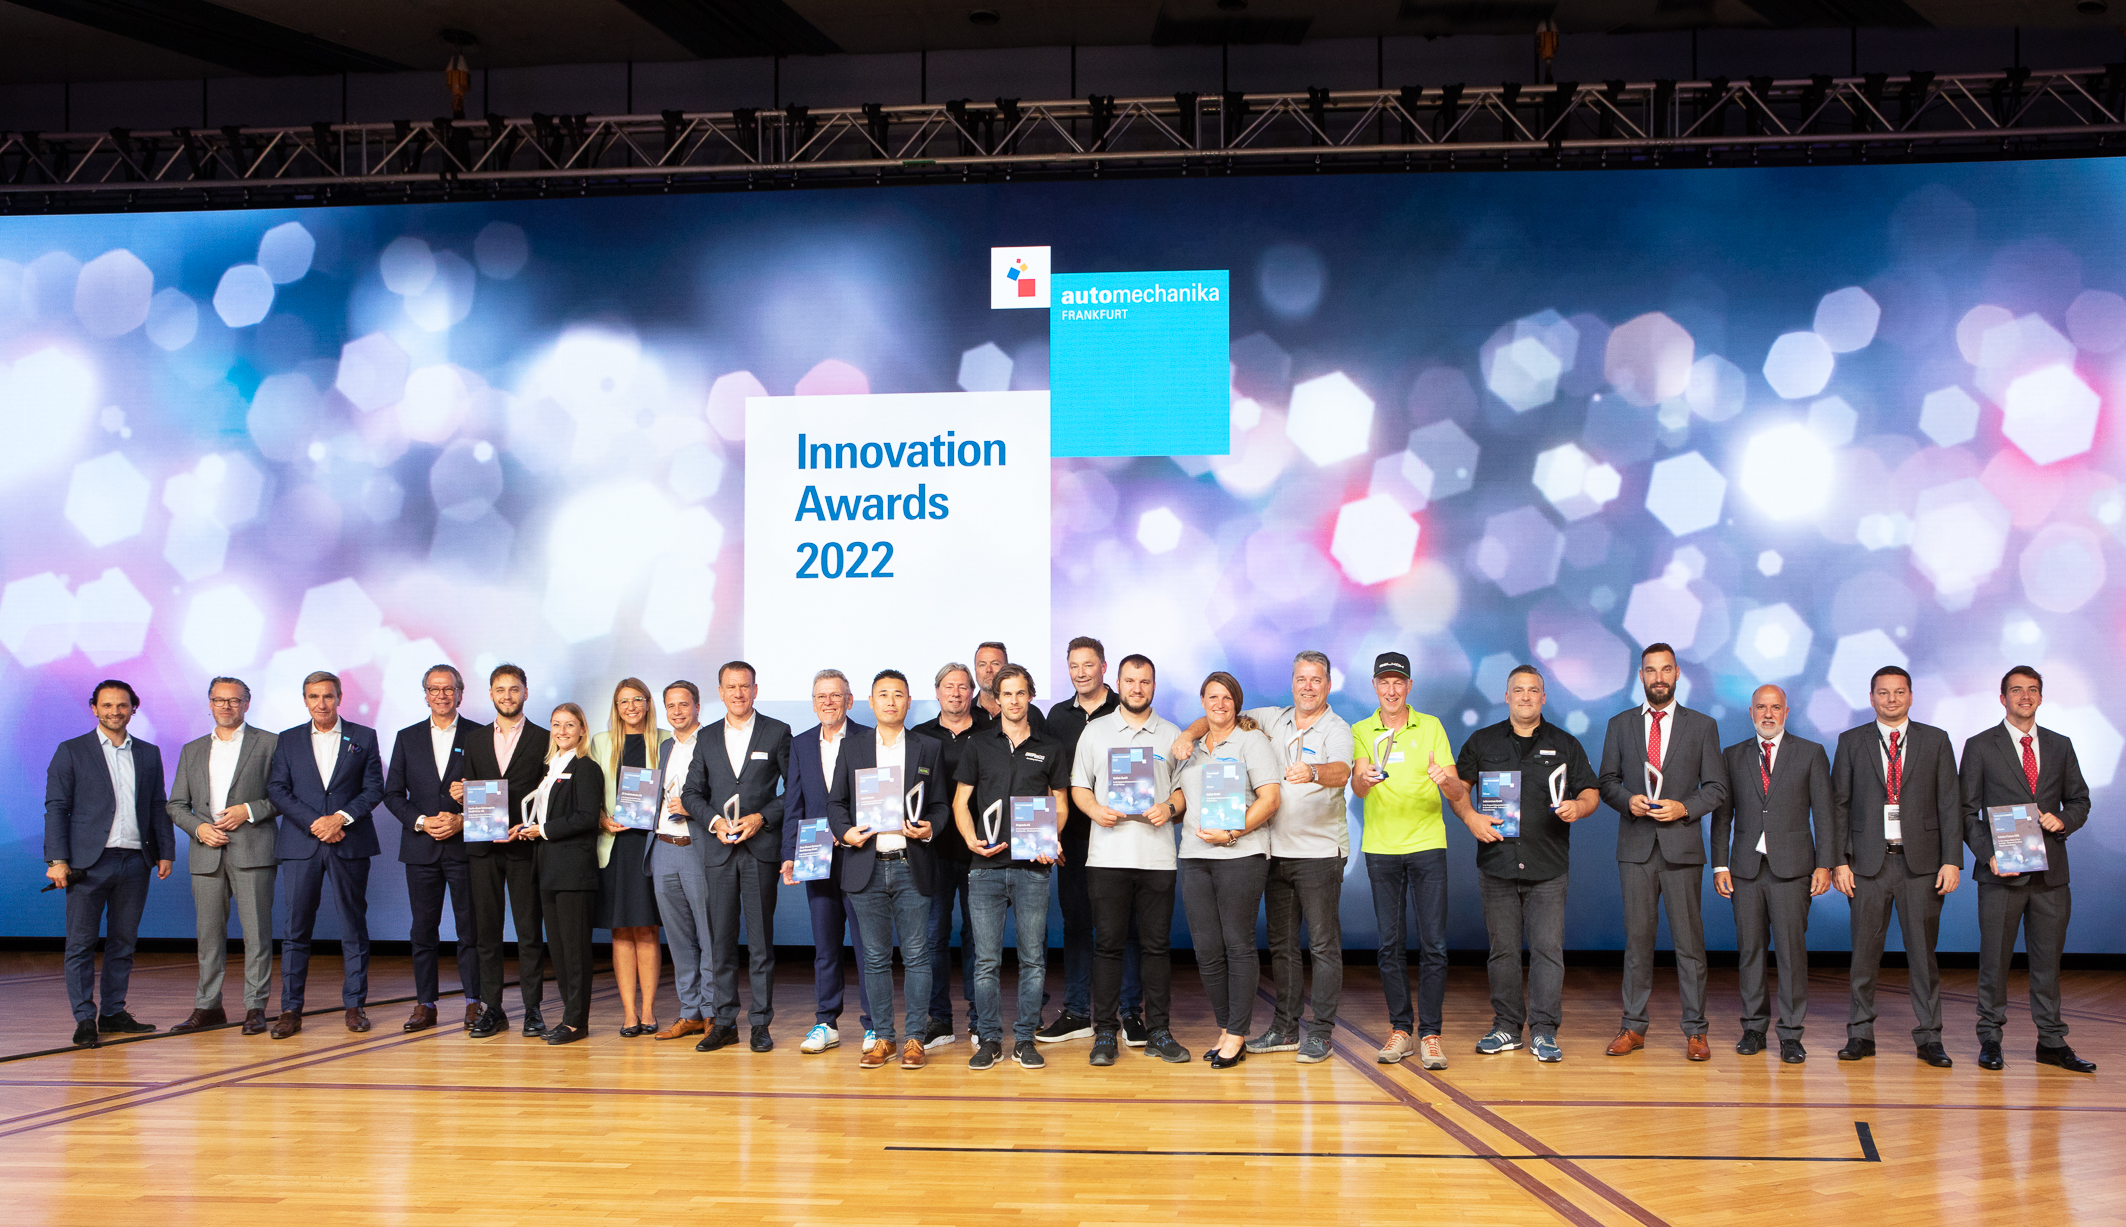 The winners at the Innovation Award 2022 ceremony